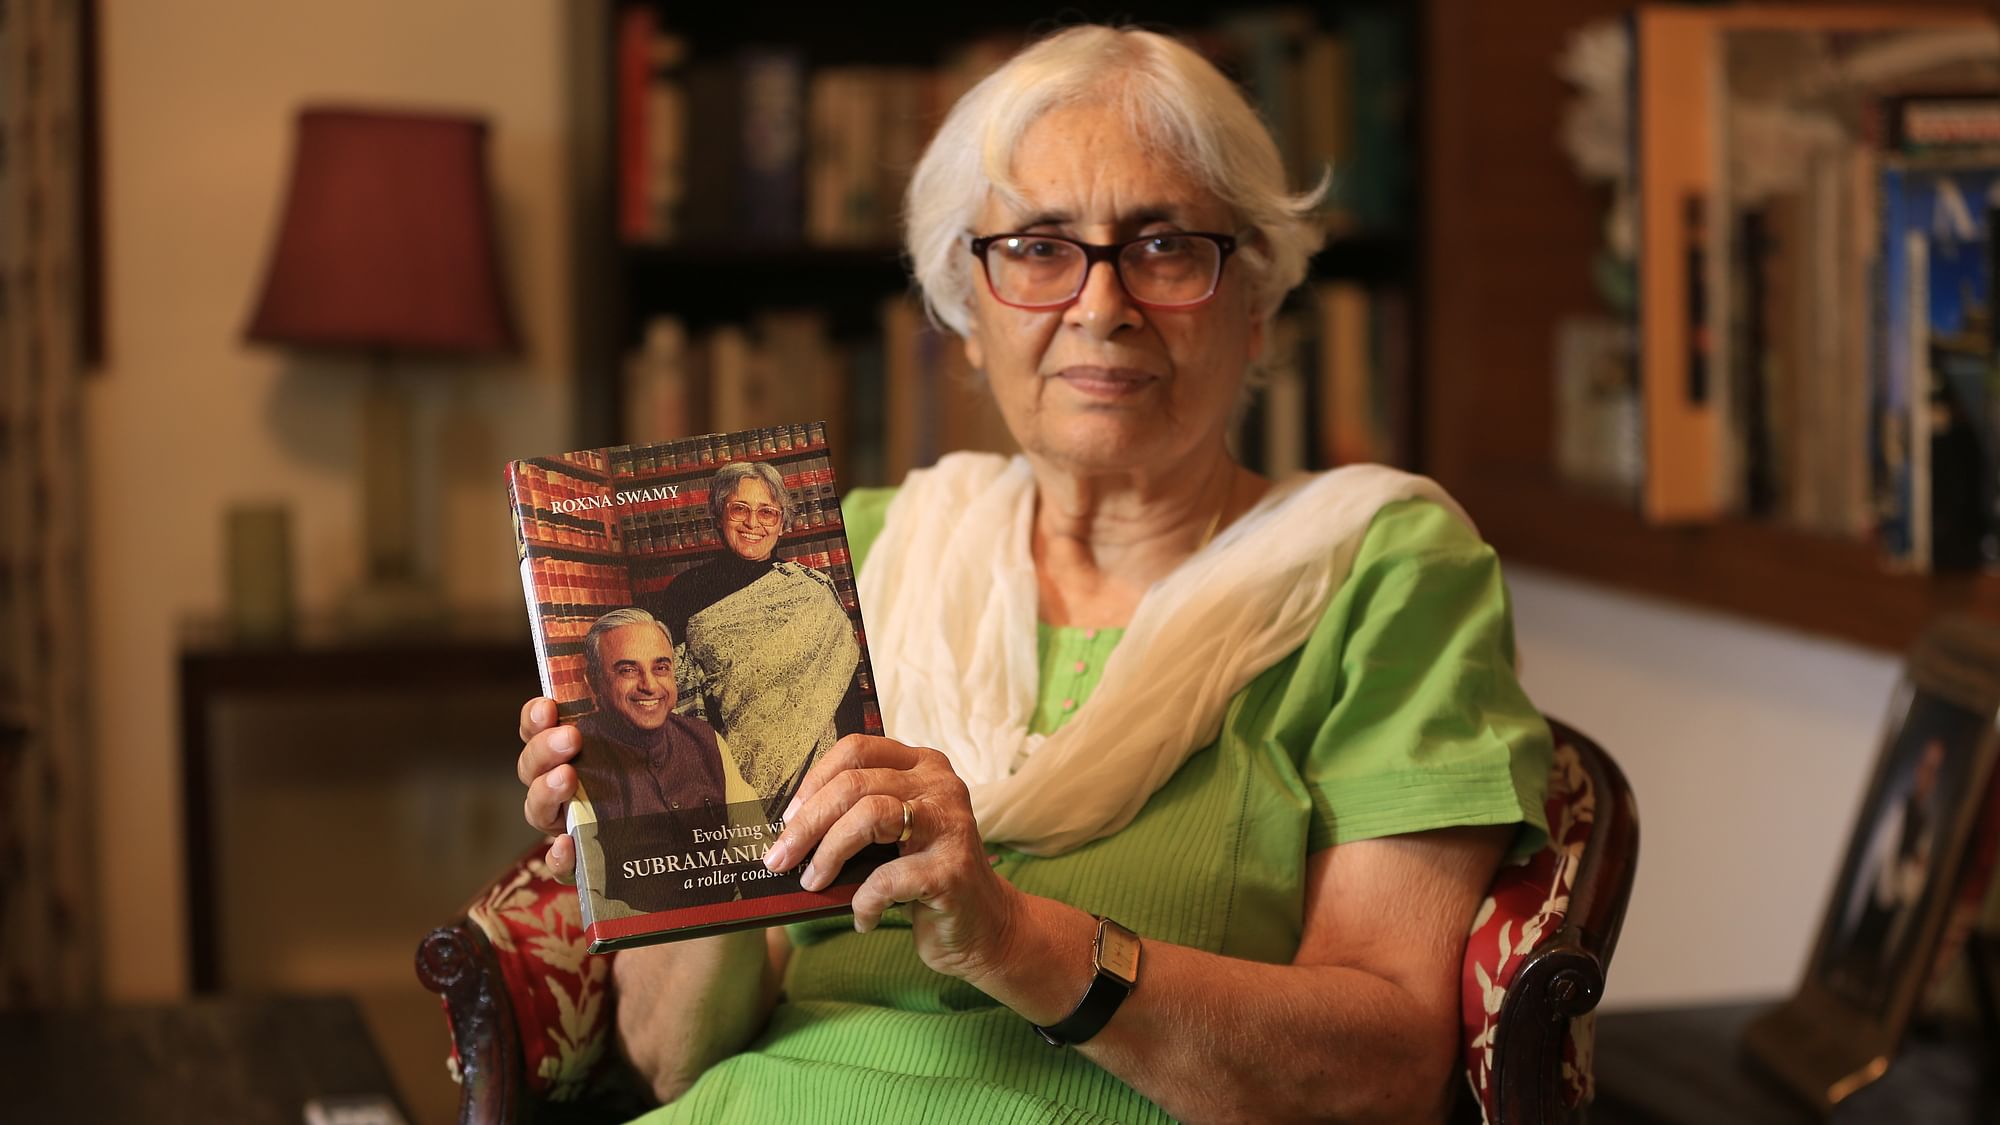 Roxna Swamy’s book ‘Evolving with Subramanian Swamy - A roller coaster ride’ releases on 17 September. 